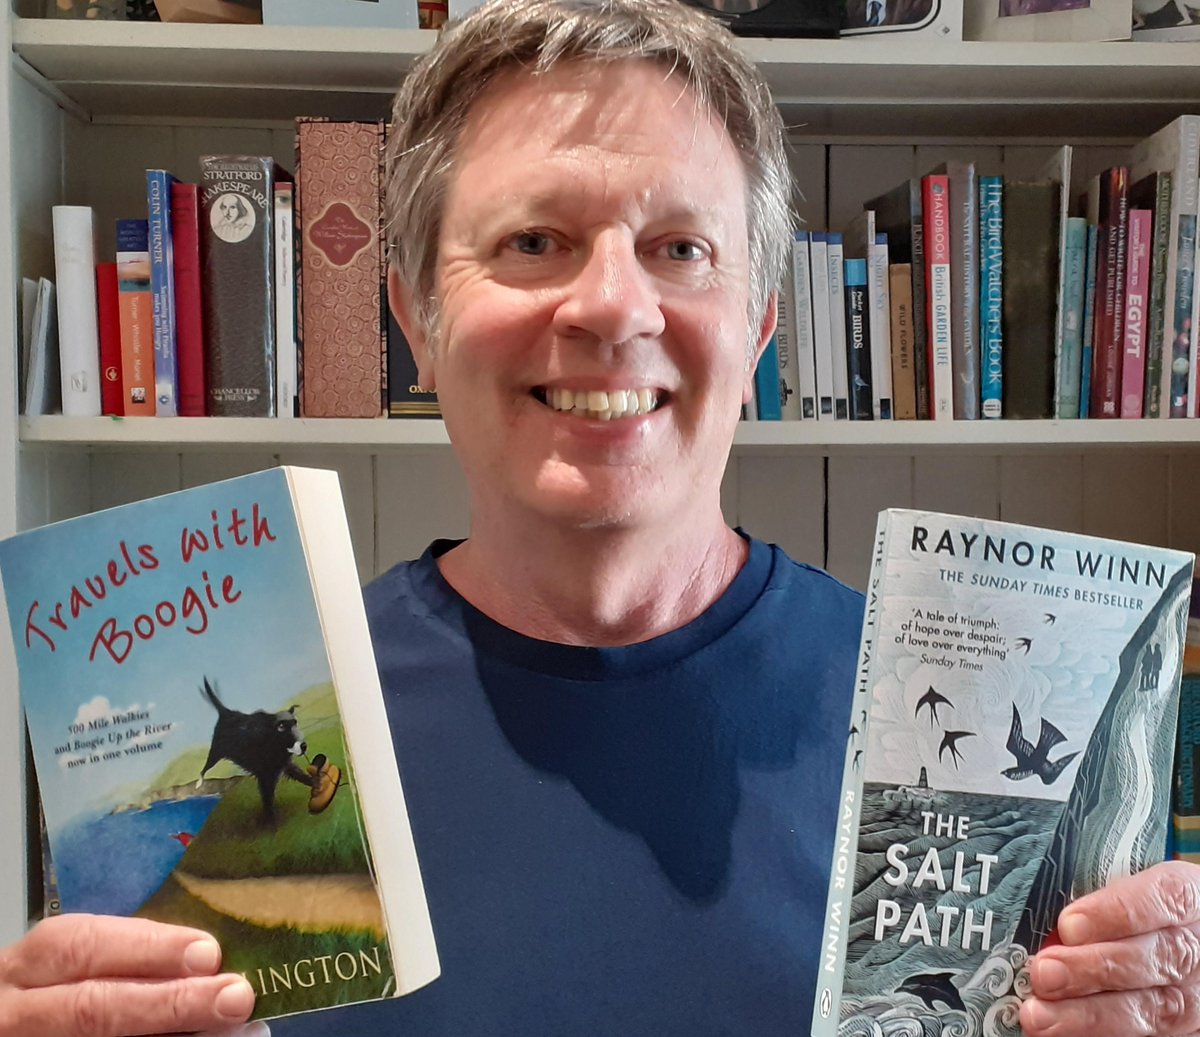 Jules recommends 'The Big Big Sea' by Martin Waddell. And John recommends two books 'The Salt Path' by Raynor Winn and 'Travels with Boogie' by Mark Wallington- "They're both about the South West Coast Path which I intend to resume walking once the lockdown is over!"